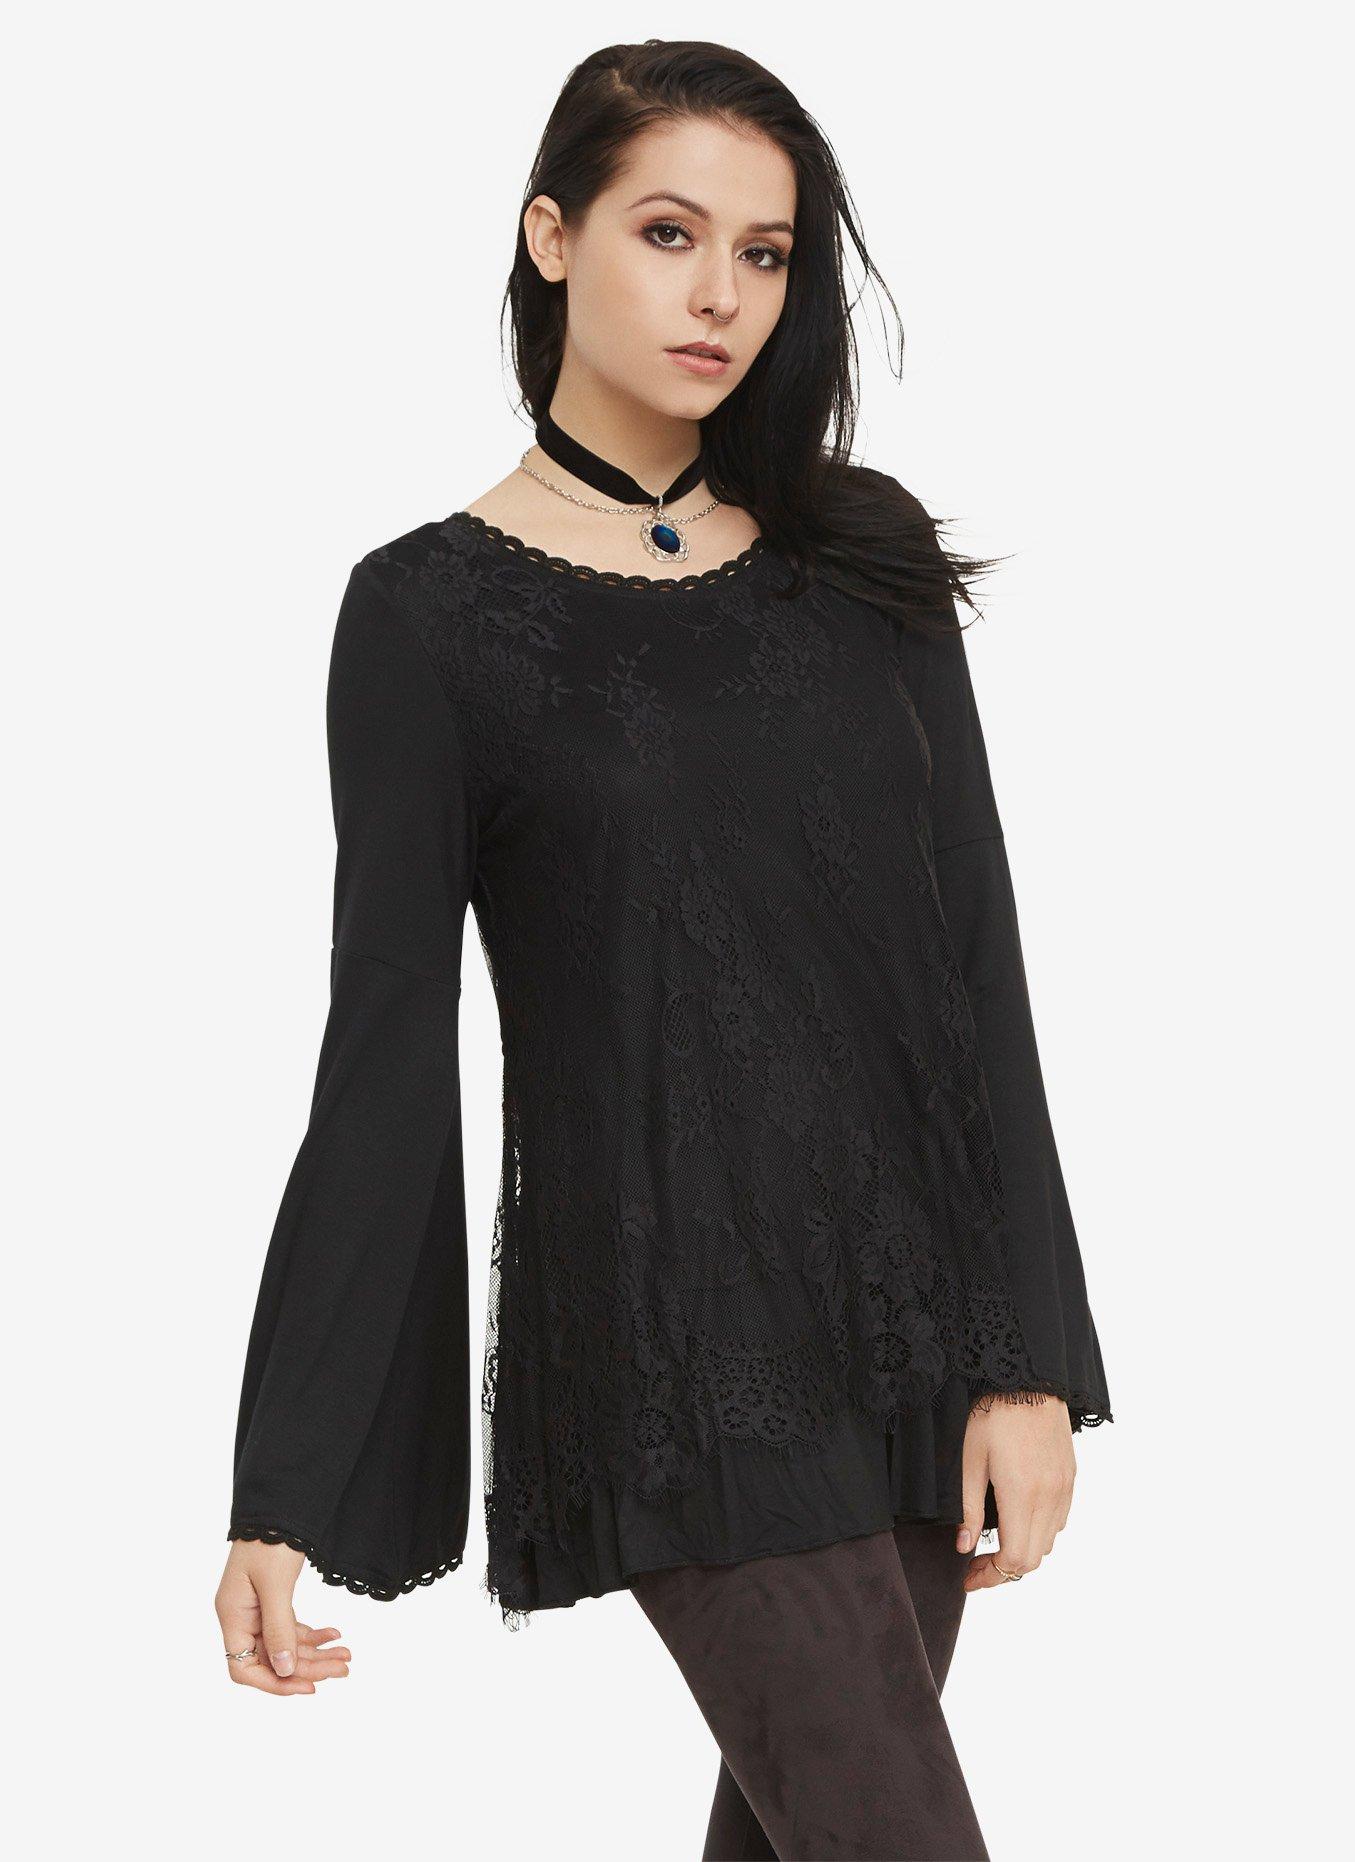 Bell Sleeve Lace Overlay Dress, BLACK, hi-res